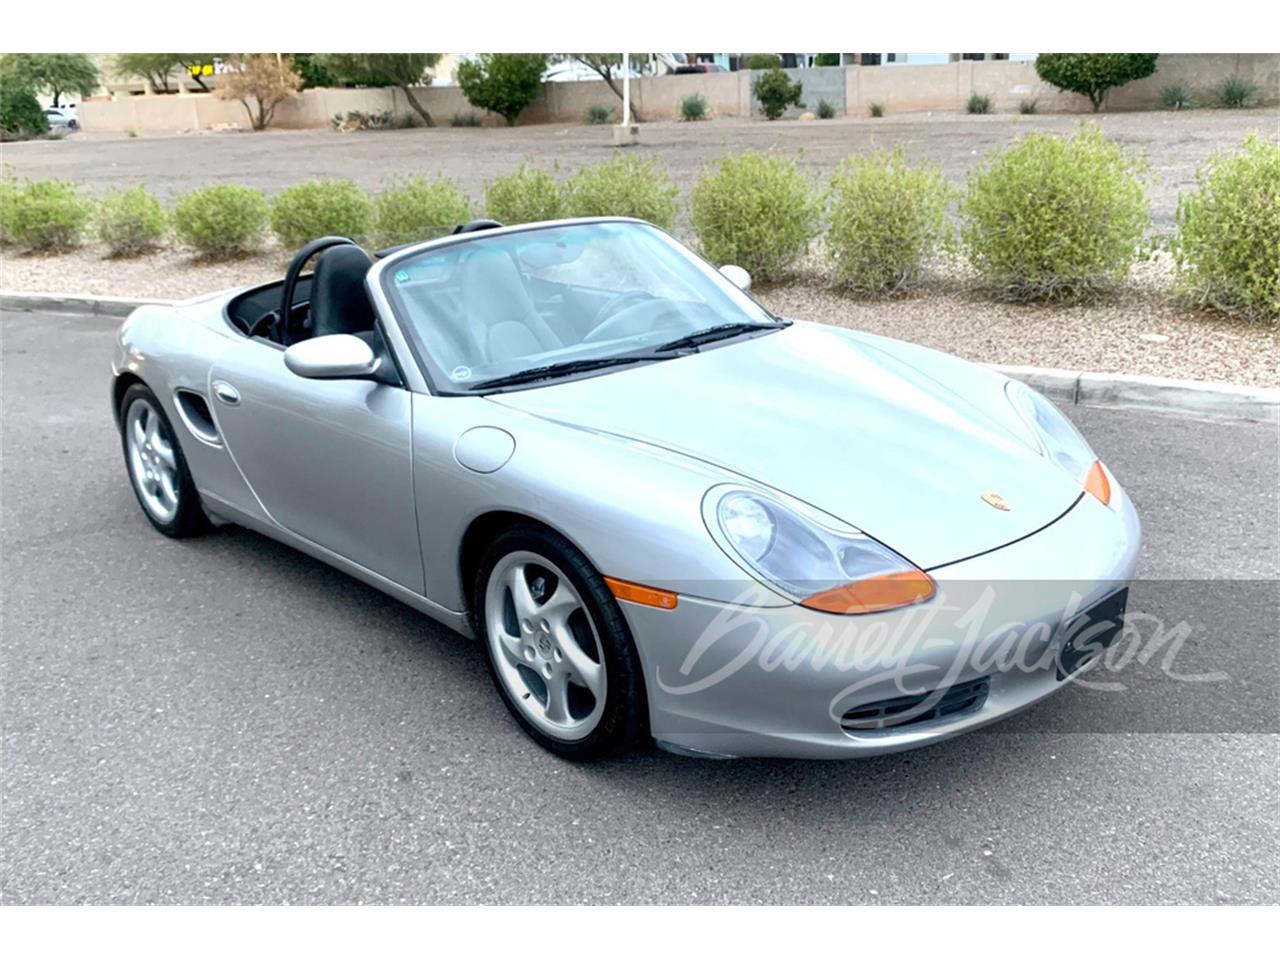 For Sale at Auction: 2002 Porsche Boxster in Scottsdale, Arizona for sale in Scottsdale, AZ